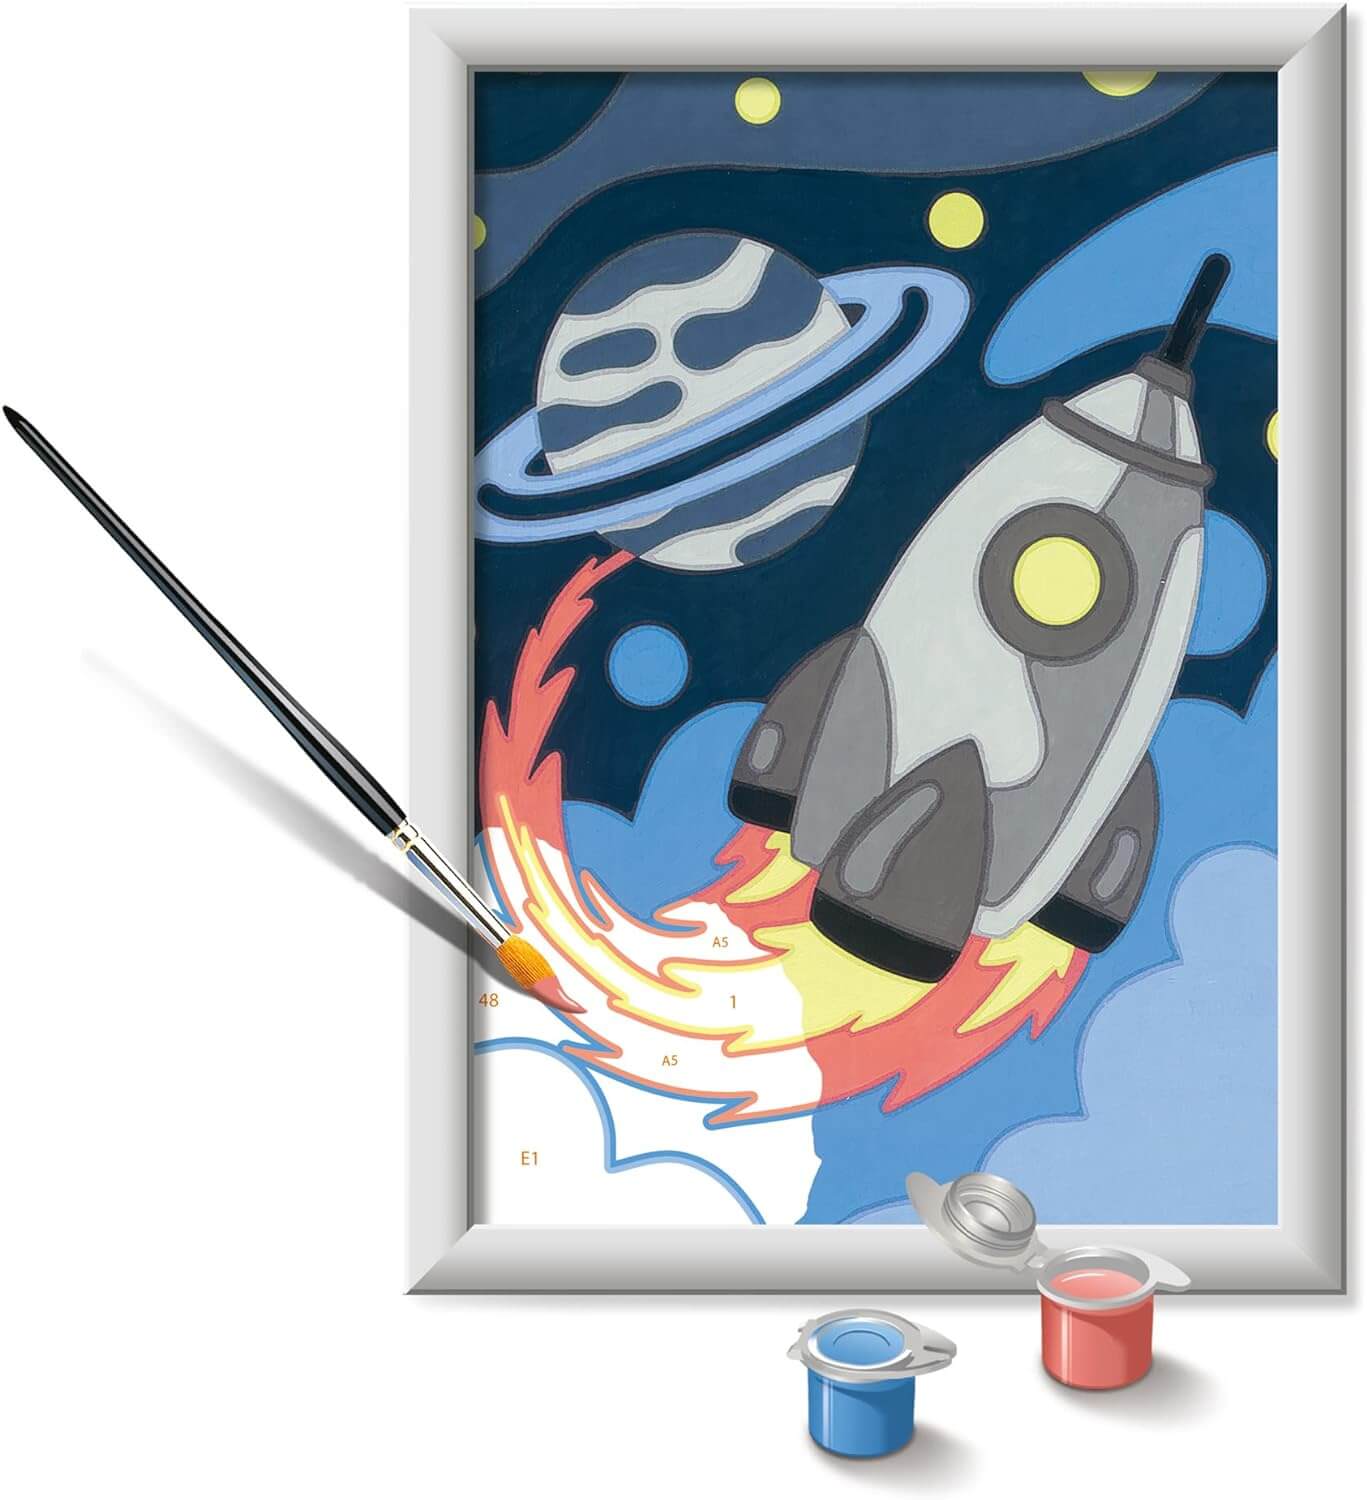 CreArt Space Explorer -Paint by Numbers Kit for Children